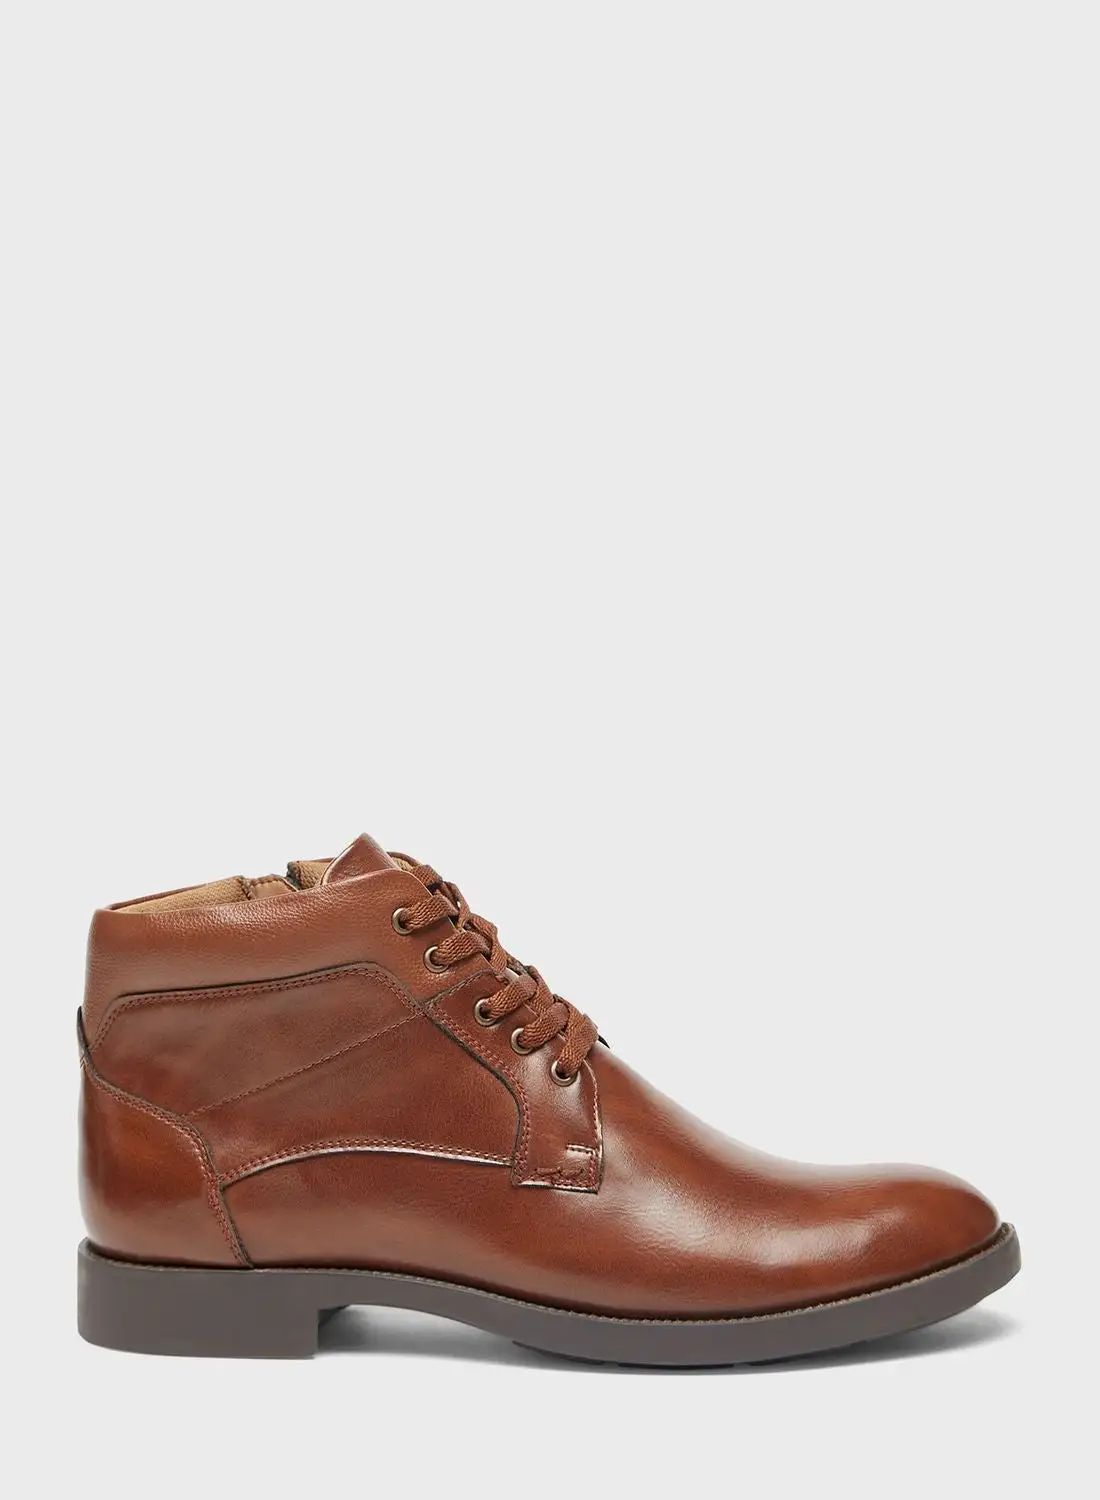 LBL by Shoexpress Formal Lace Up Boot